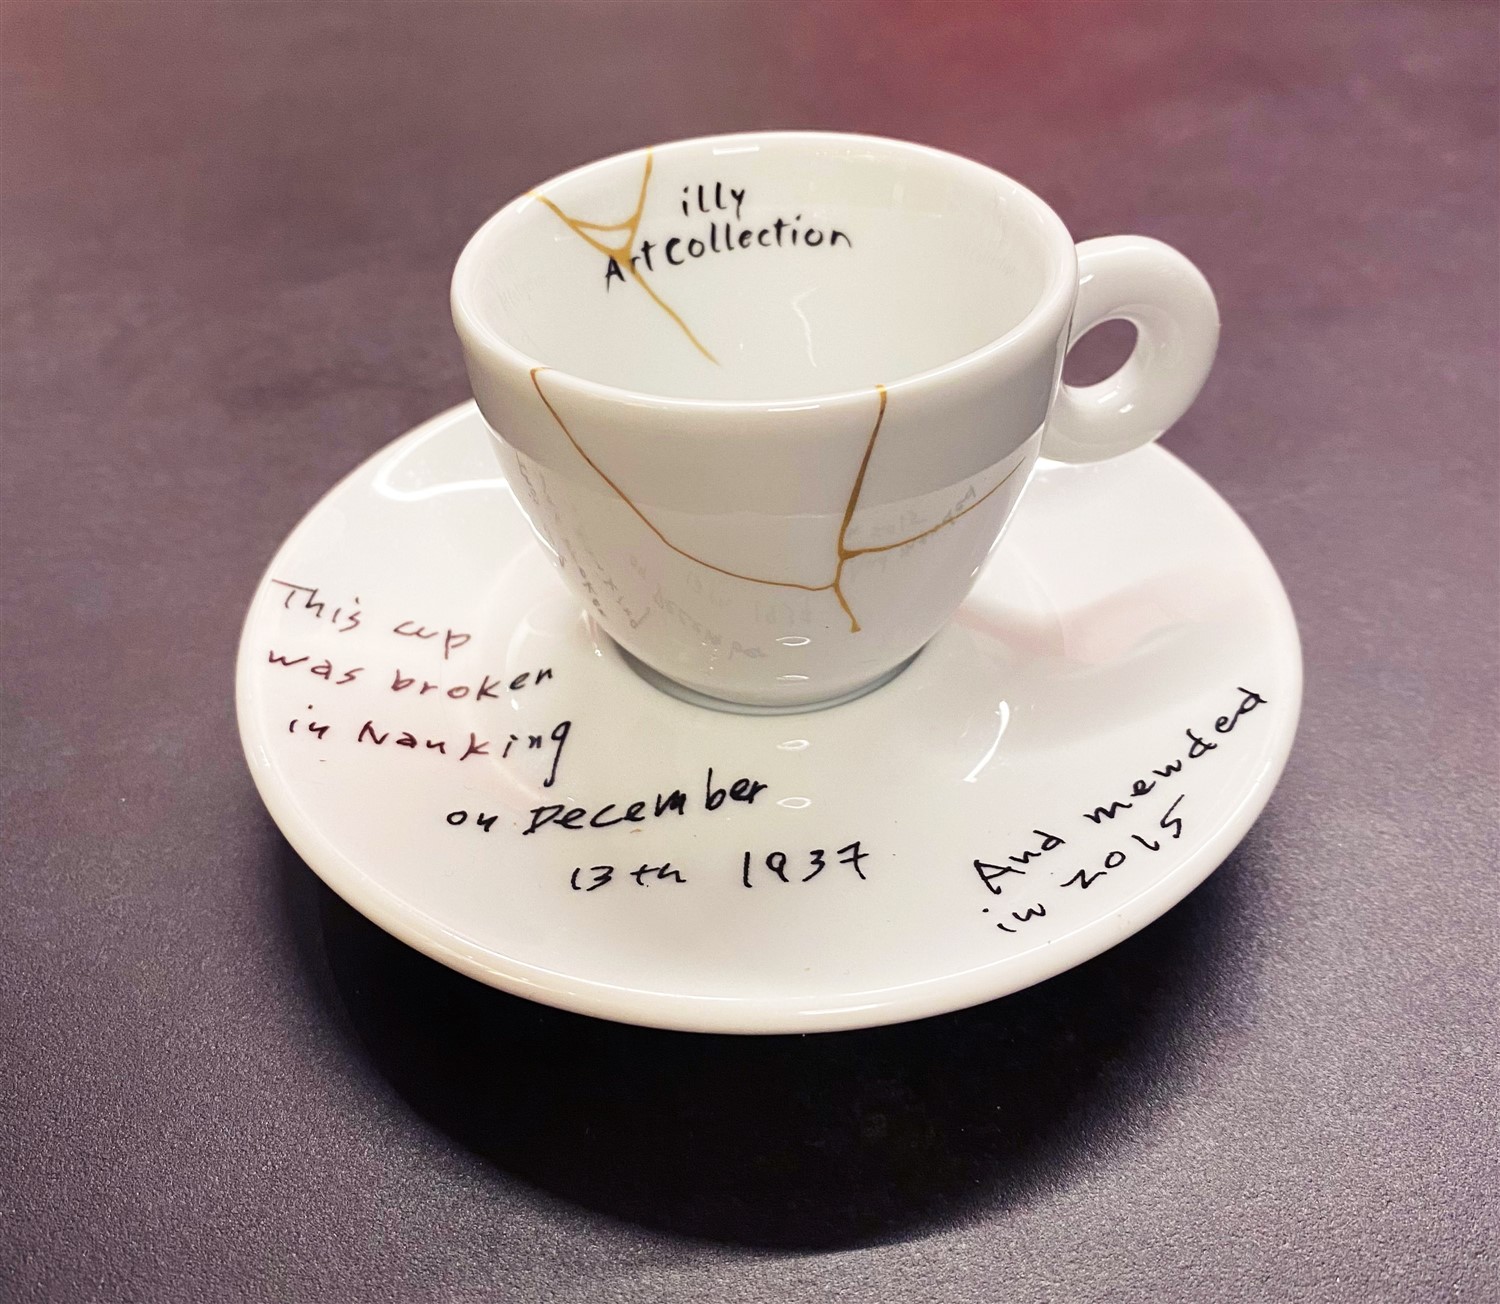 Yoko Ono, illy Art Collection - Mended Cups, 2015, Saar Mor and Itamar Rain's Collection. Photograph: Reut Raboach